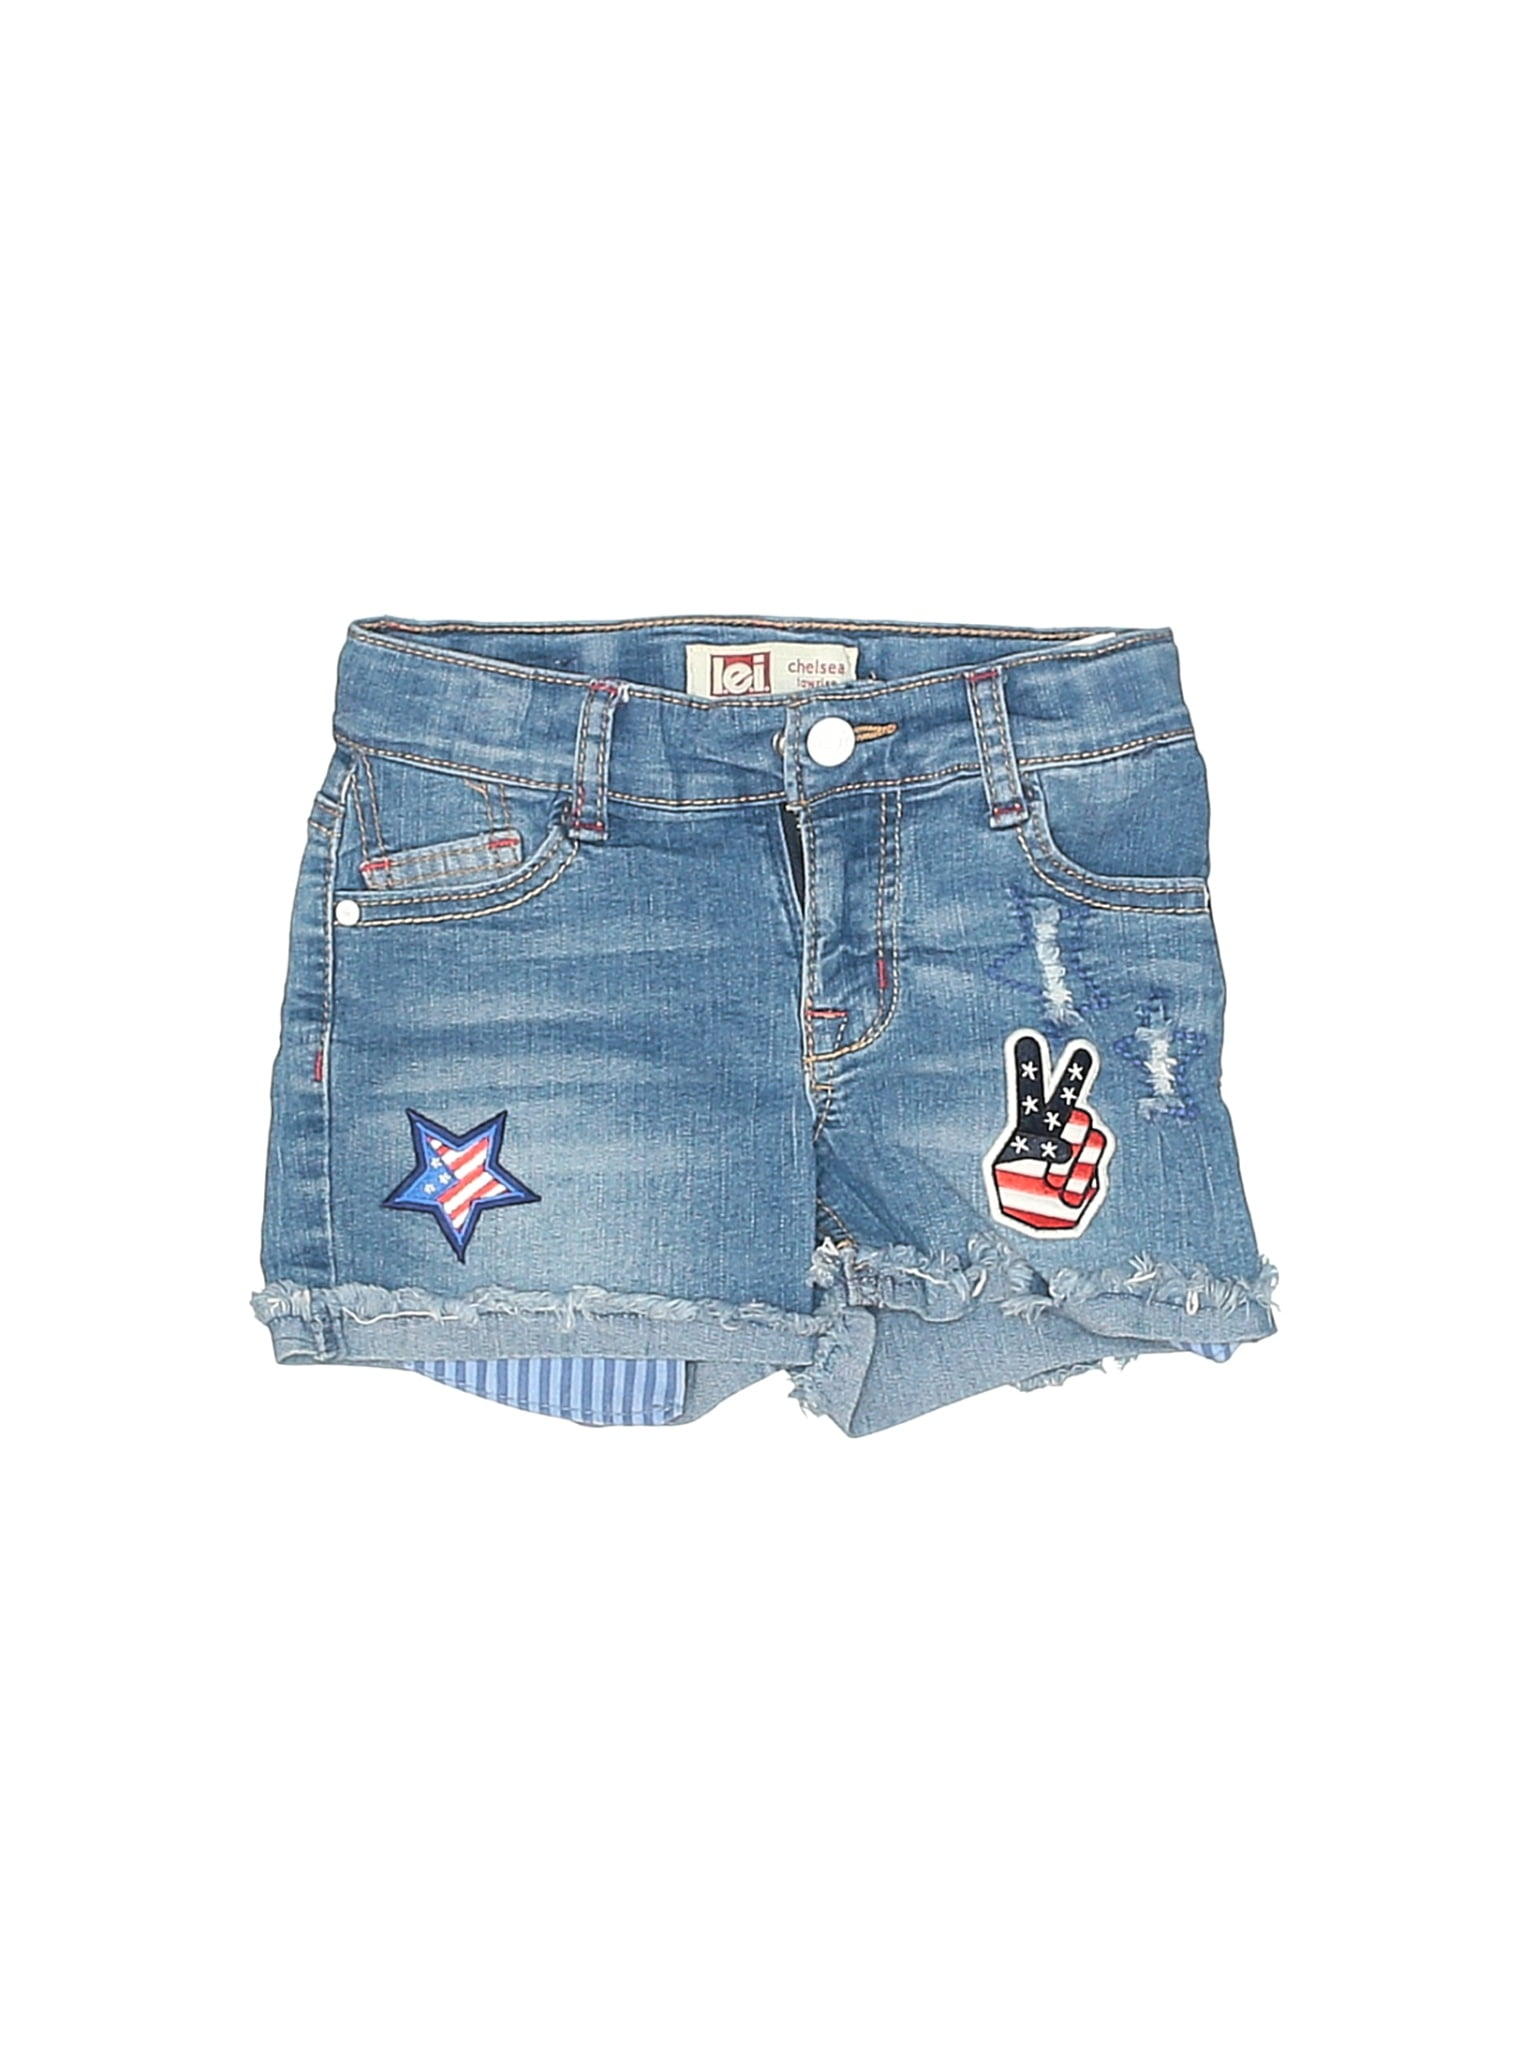 lei jeans shorts